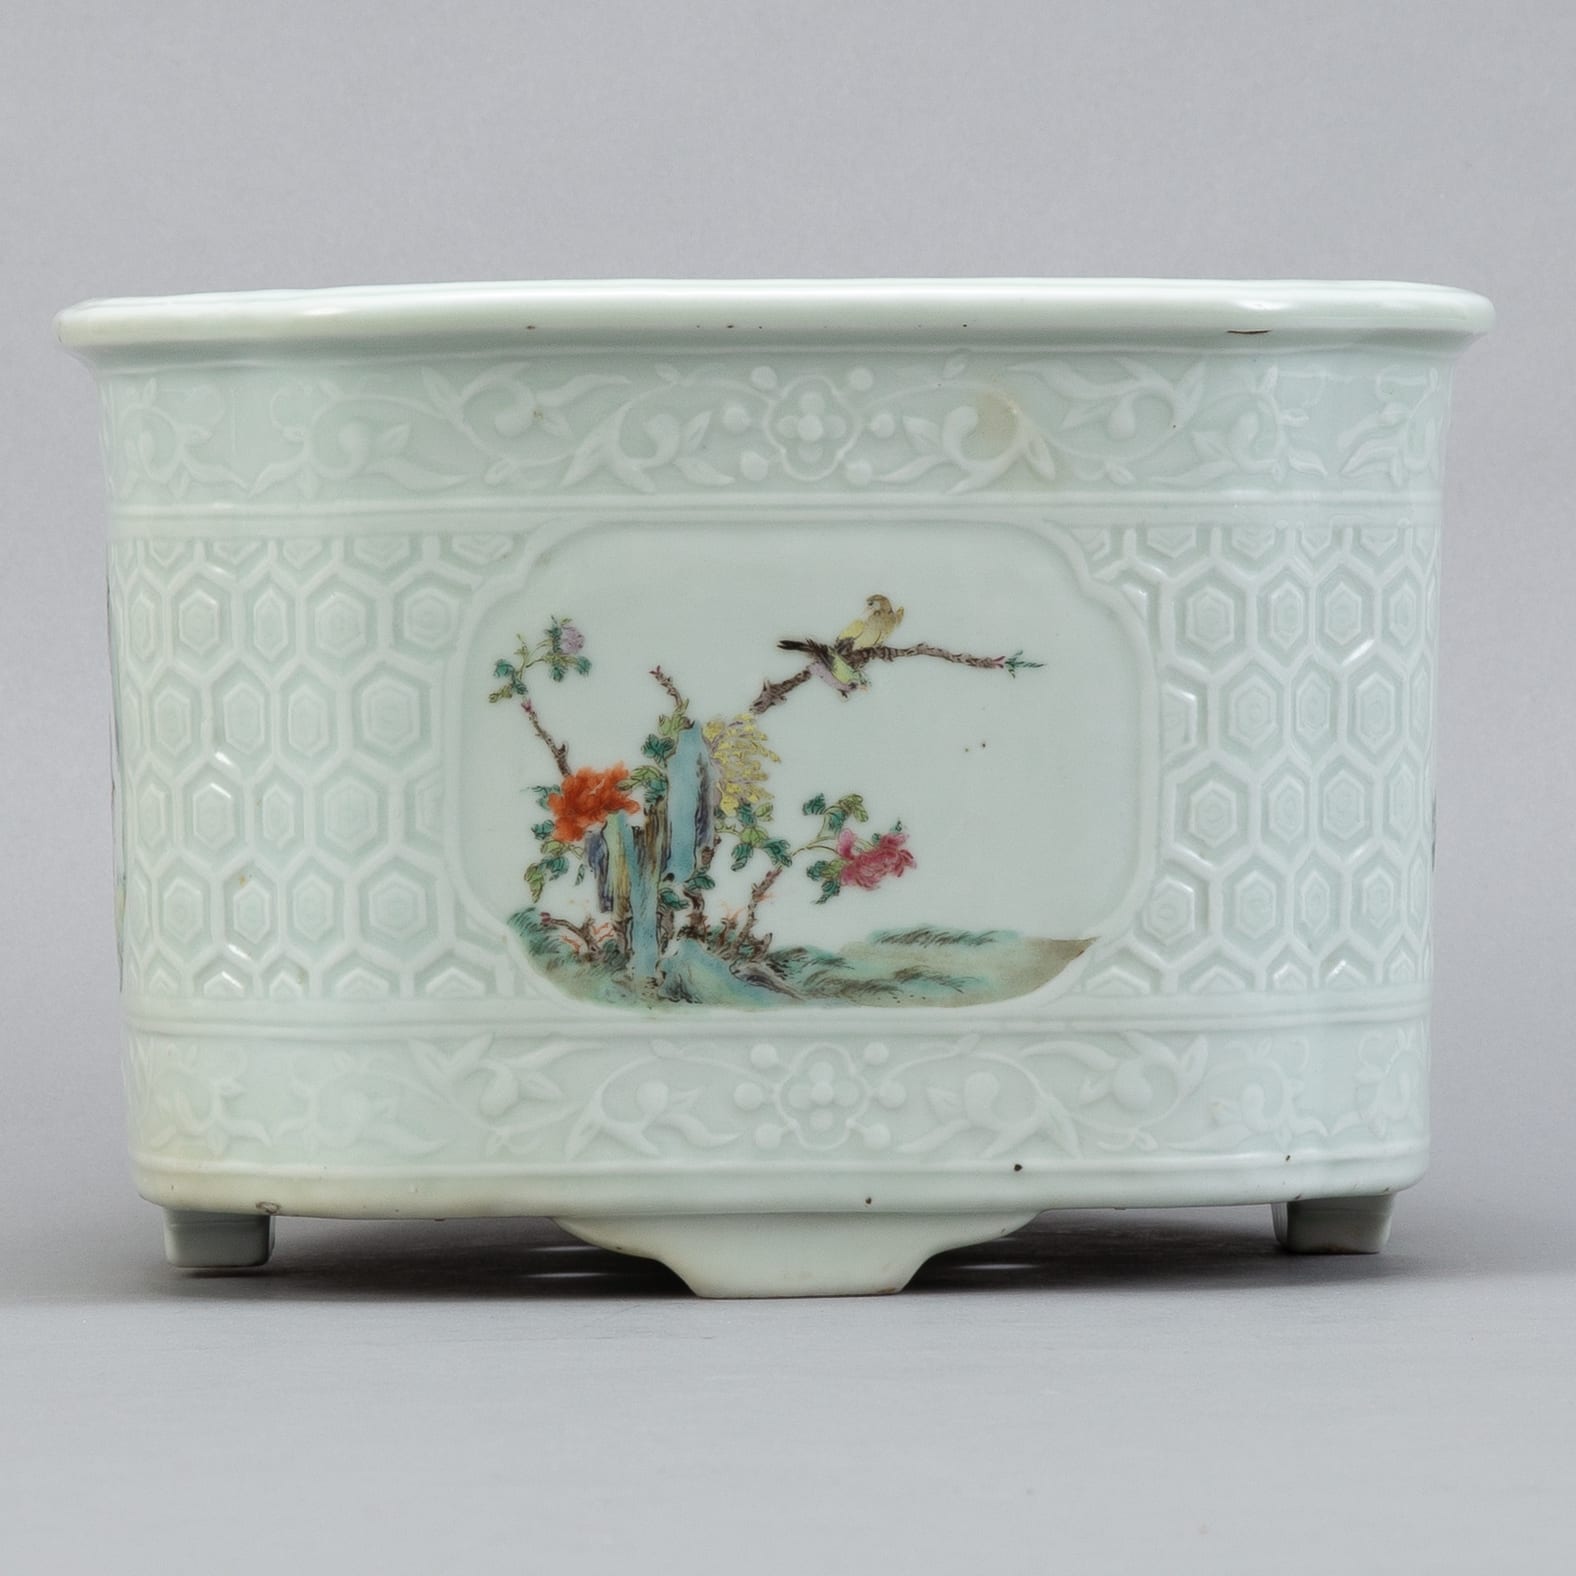 Lot 253: 19th c. Chinese Famille Rose Porcelain Jardiniere